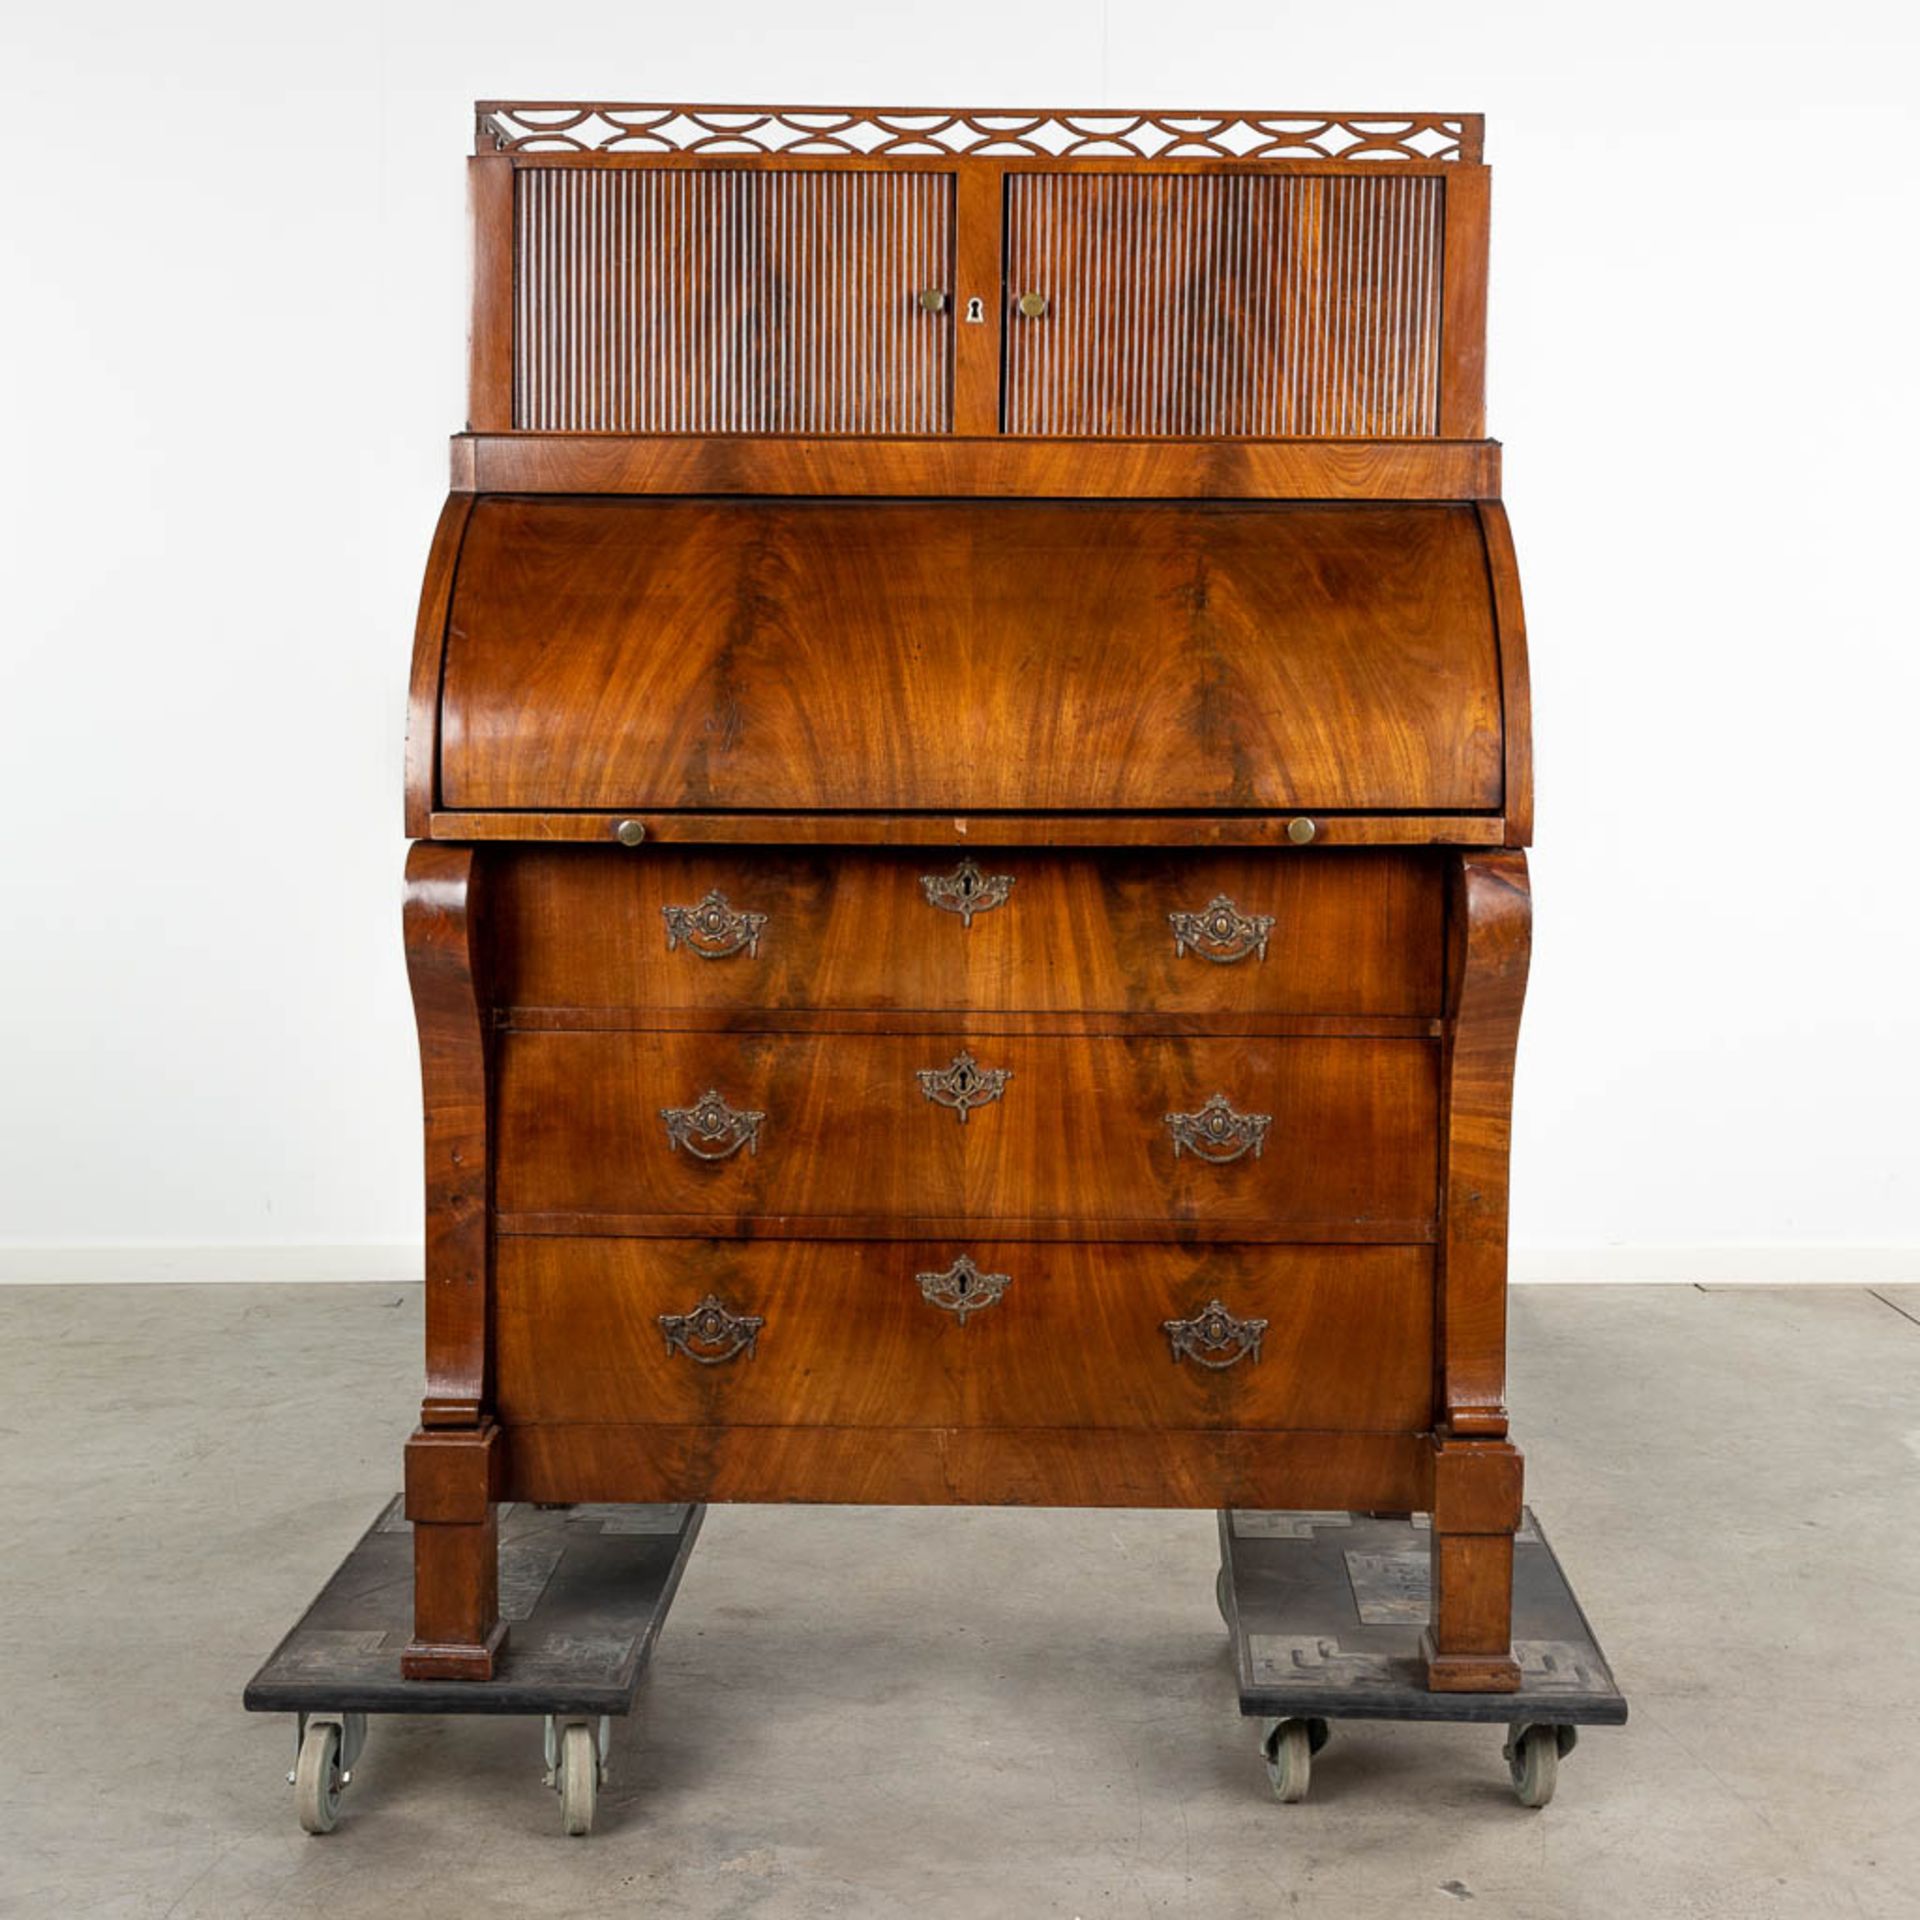 A commode Secretaire, with rolling shutters, mahogany veneer and a matching armchair. 19th century. - Bild 6 aus 25